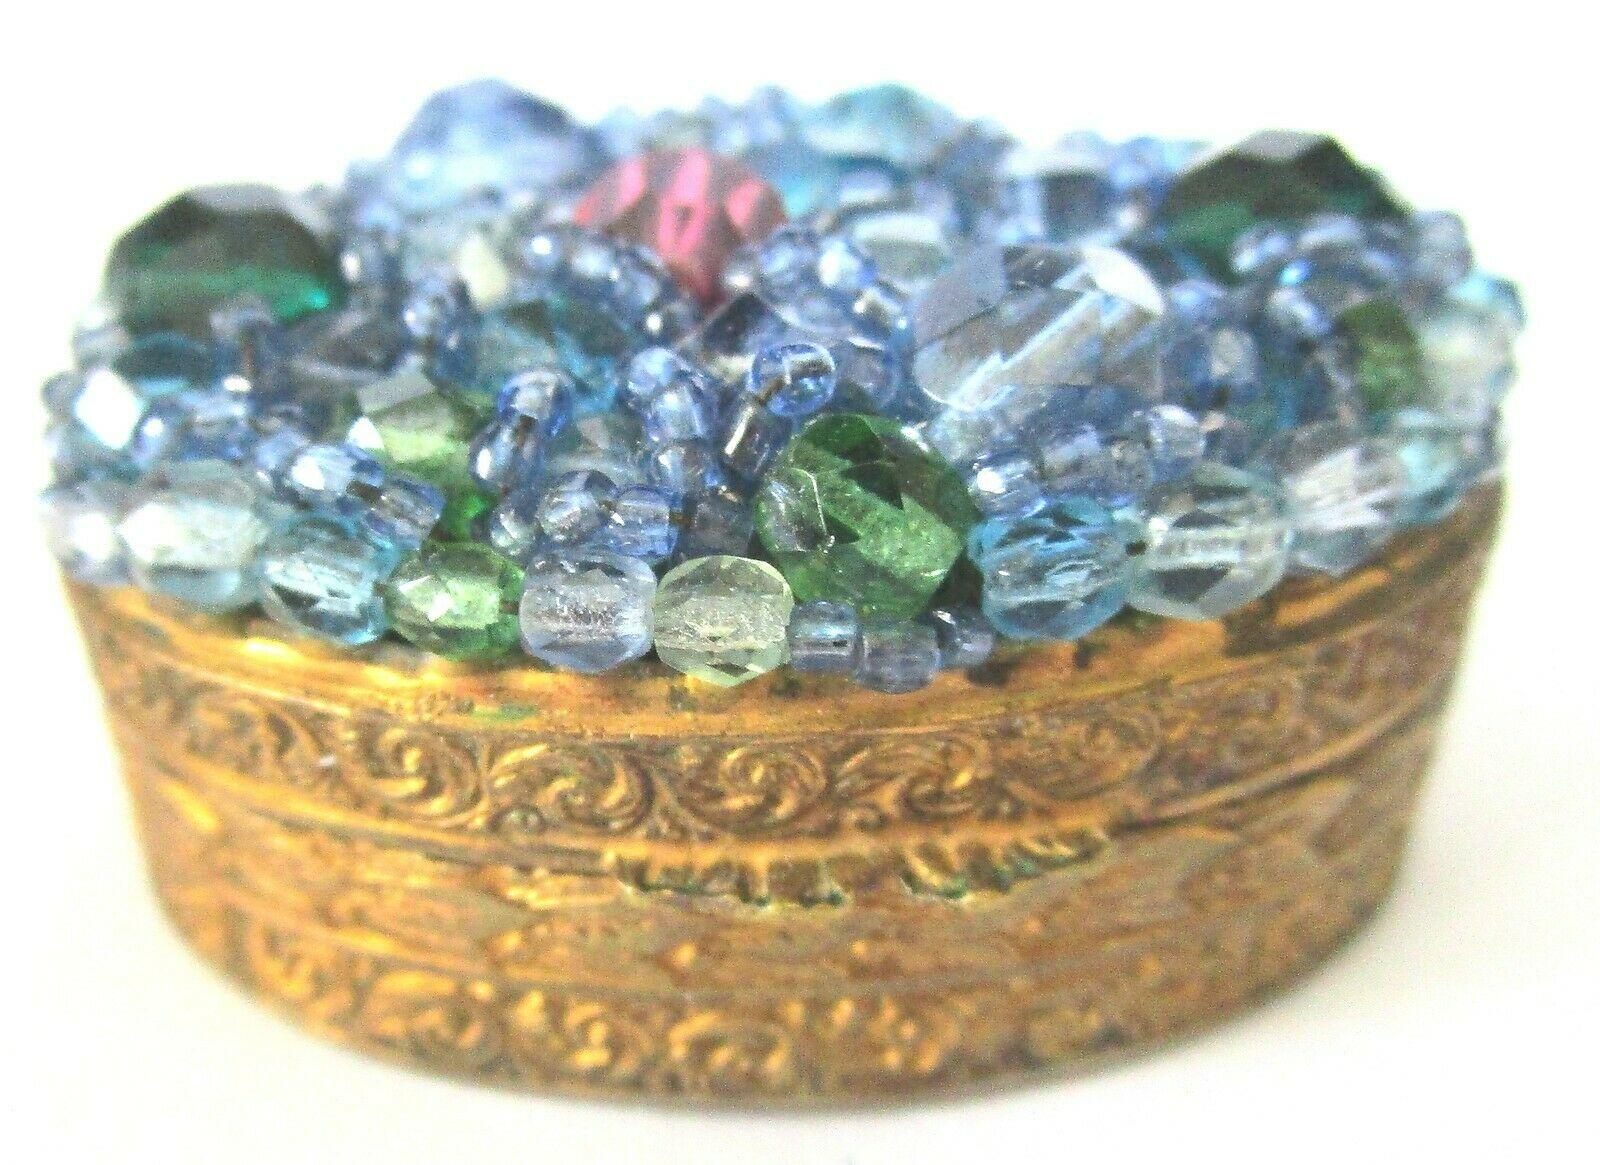 Beautiful rare vintage Coppola e Toppo trinket or pill box. Top encrusted with hand wired crystals, in blues, greens and pink in ornate embossed gold tone design holder. Signed: MADE IN ITALY, however, is a verified Coppola e Toppo piece! Most if